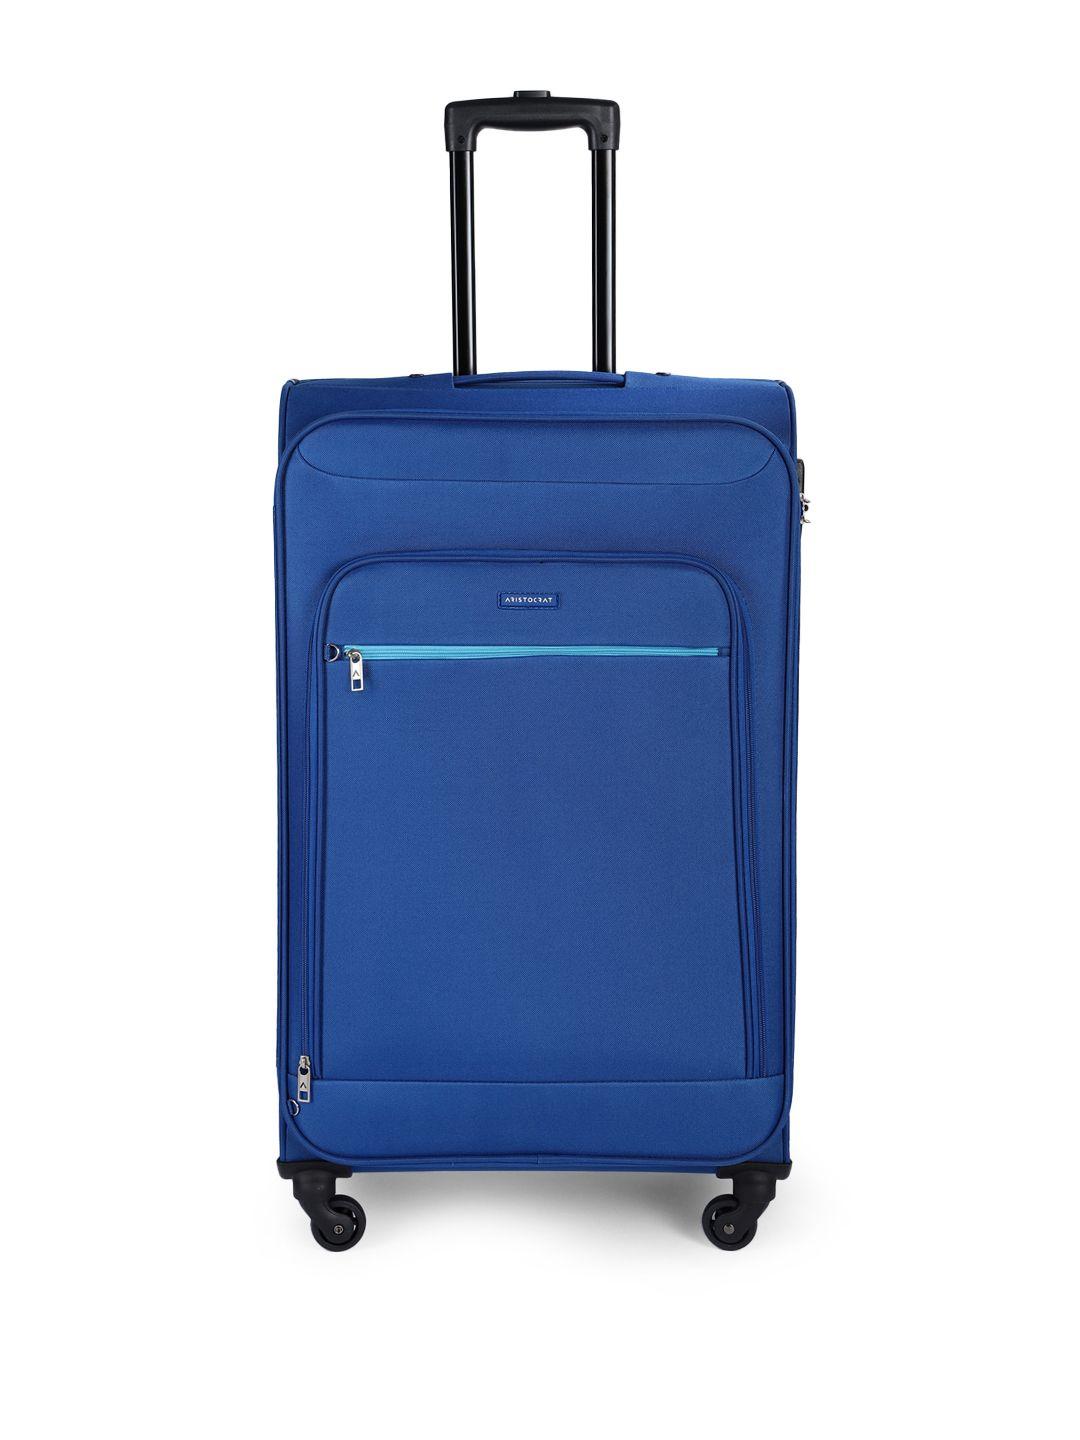 aristocrat bright blue solid nile exp strolly 76 large luggage trolley suitcase